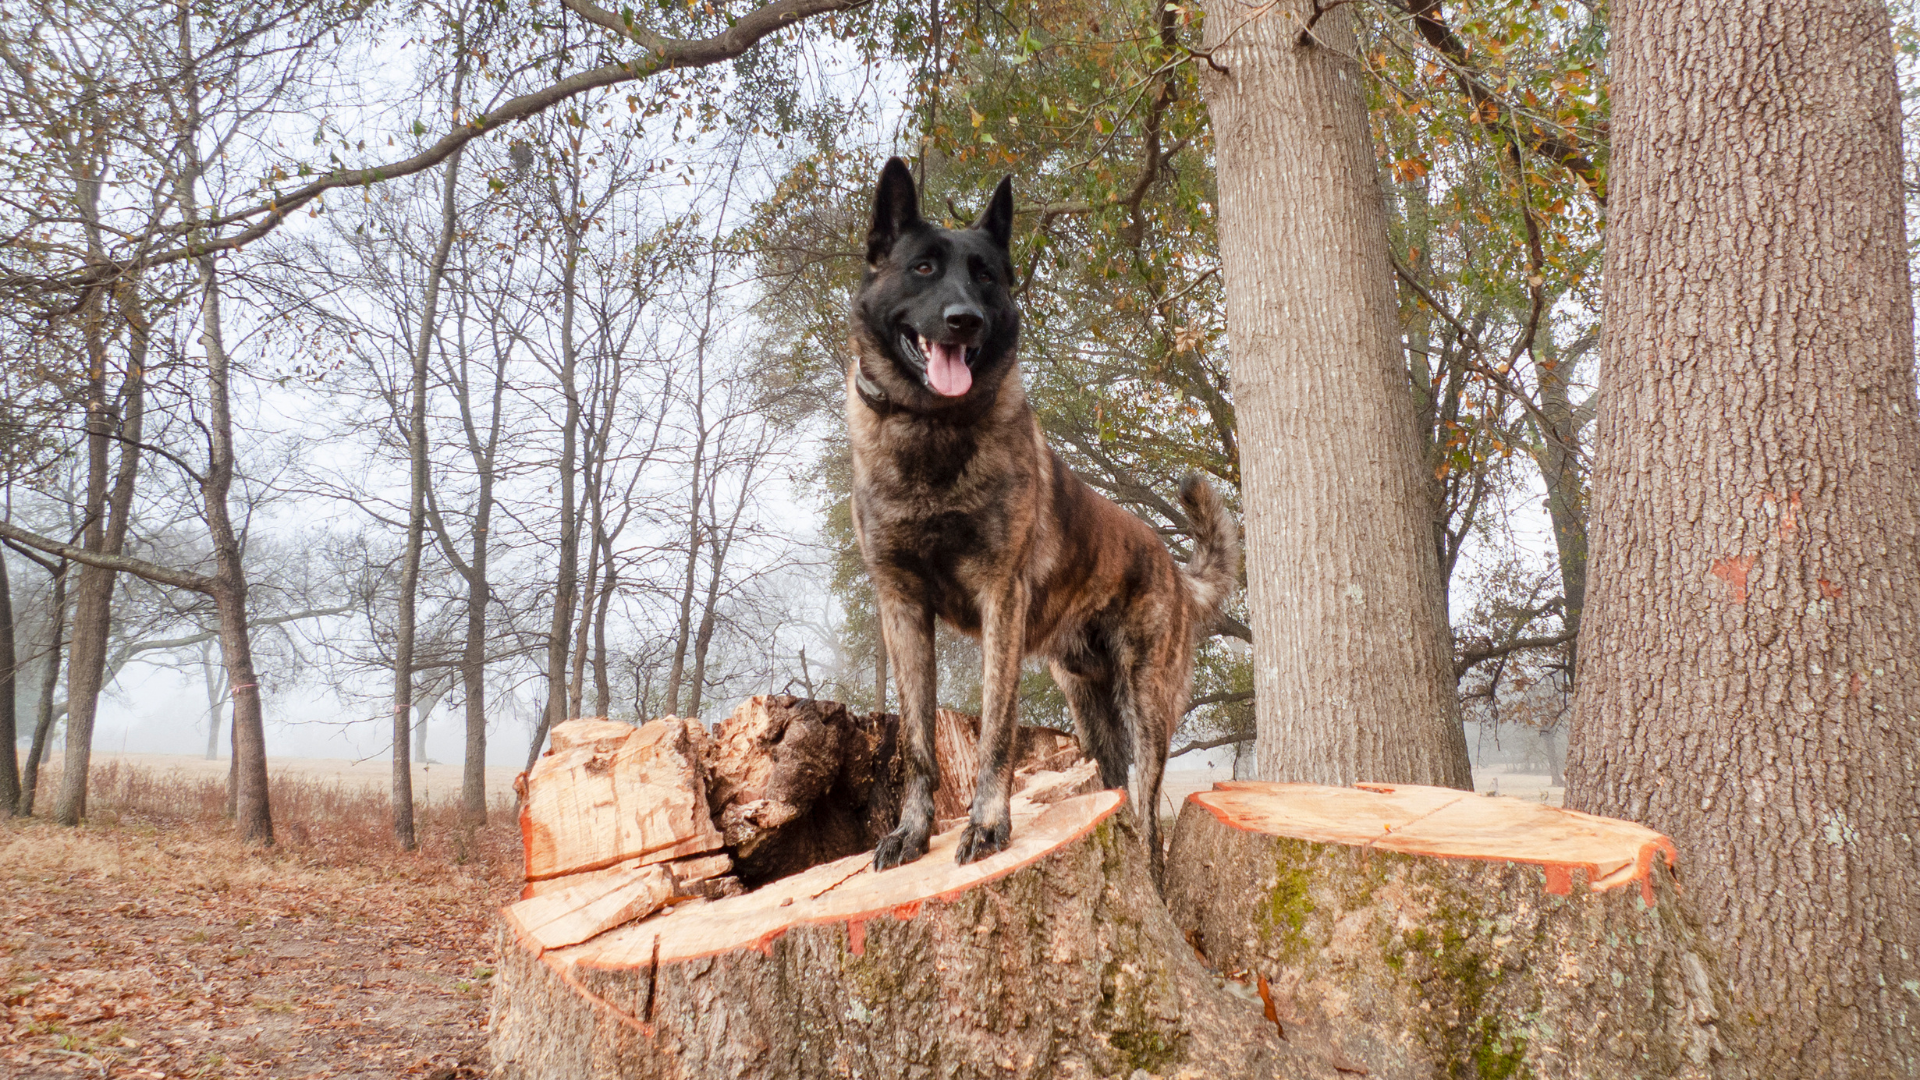 Learn about desanto's dogs and our expert level and caring dog training